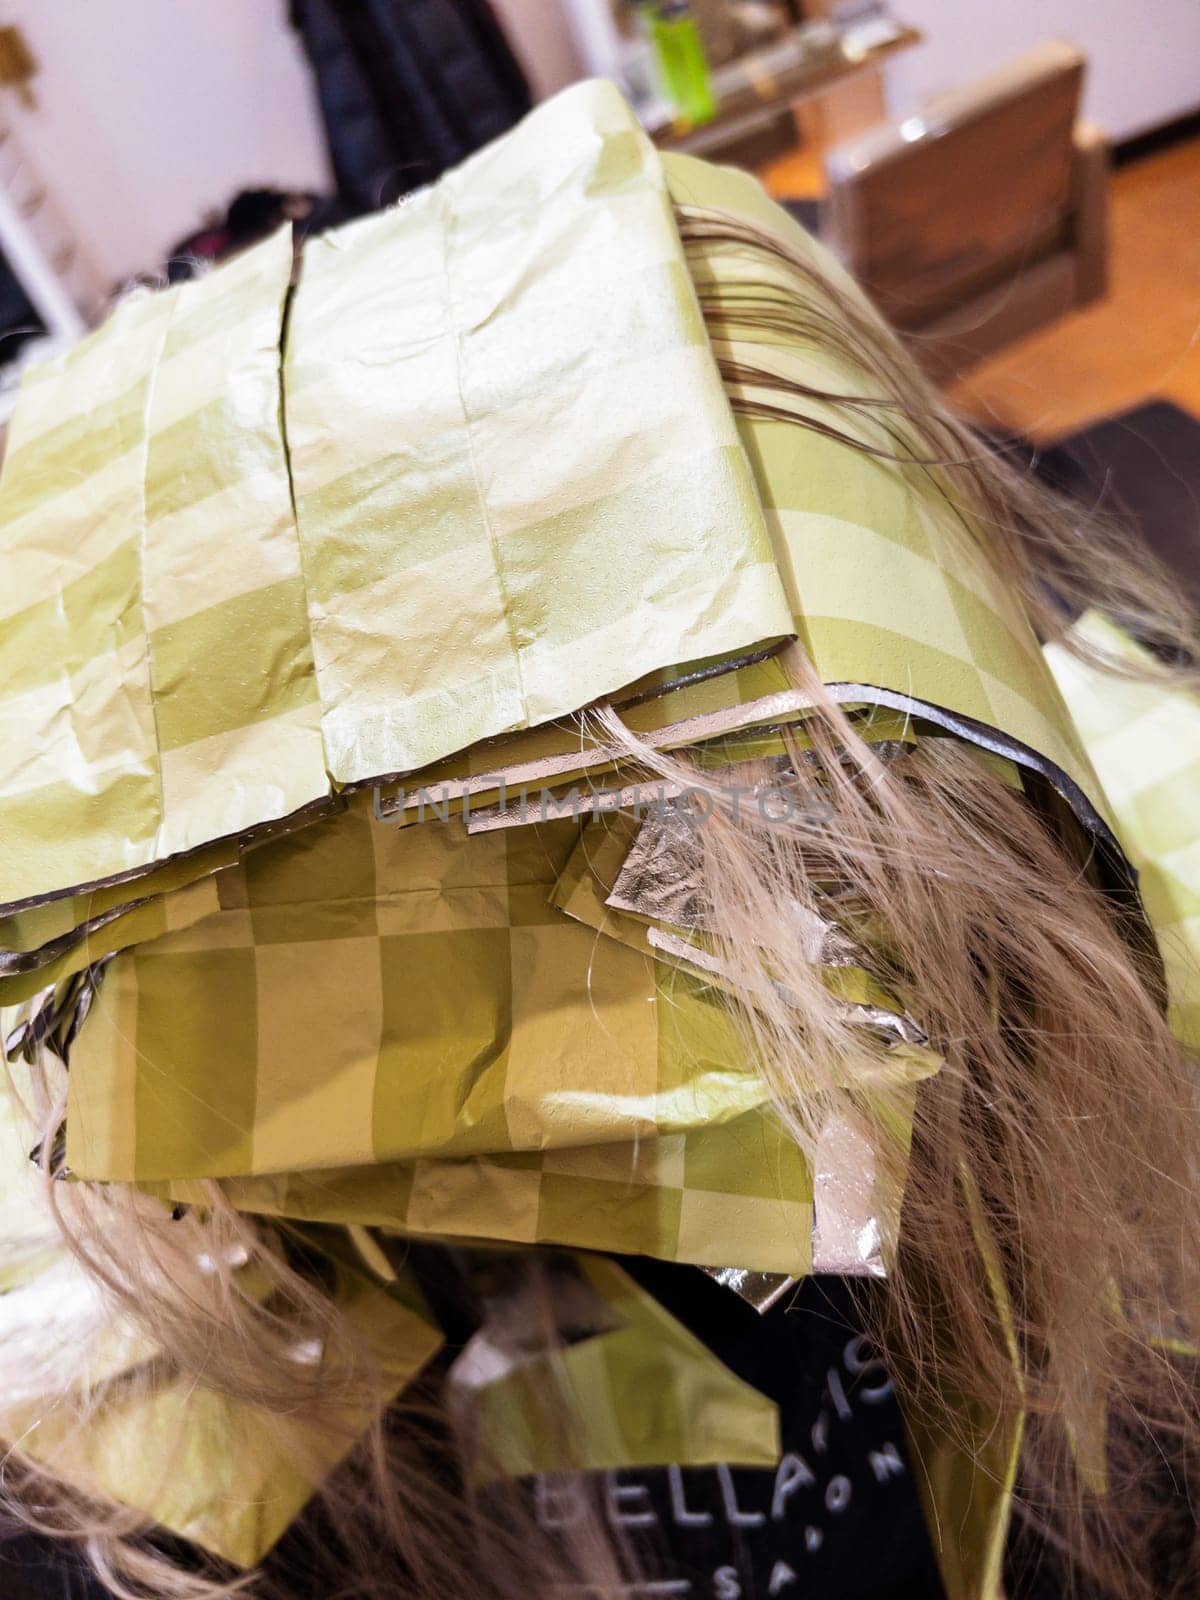 Strands of hair peek through a series of yellow foils meticulously arranged for a highlighting treatment. The salon's ambiance is reflected in the background, where focused stylists perform their craft, transforming hair with skill and precision.